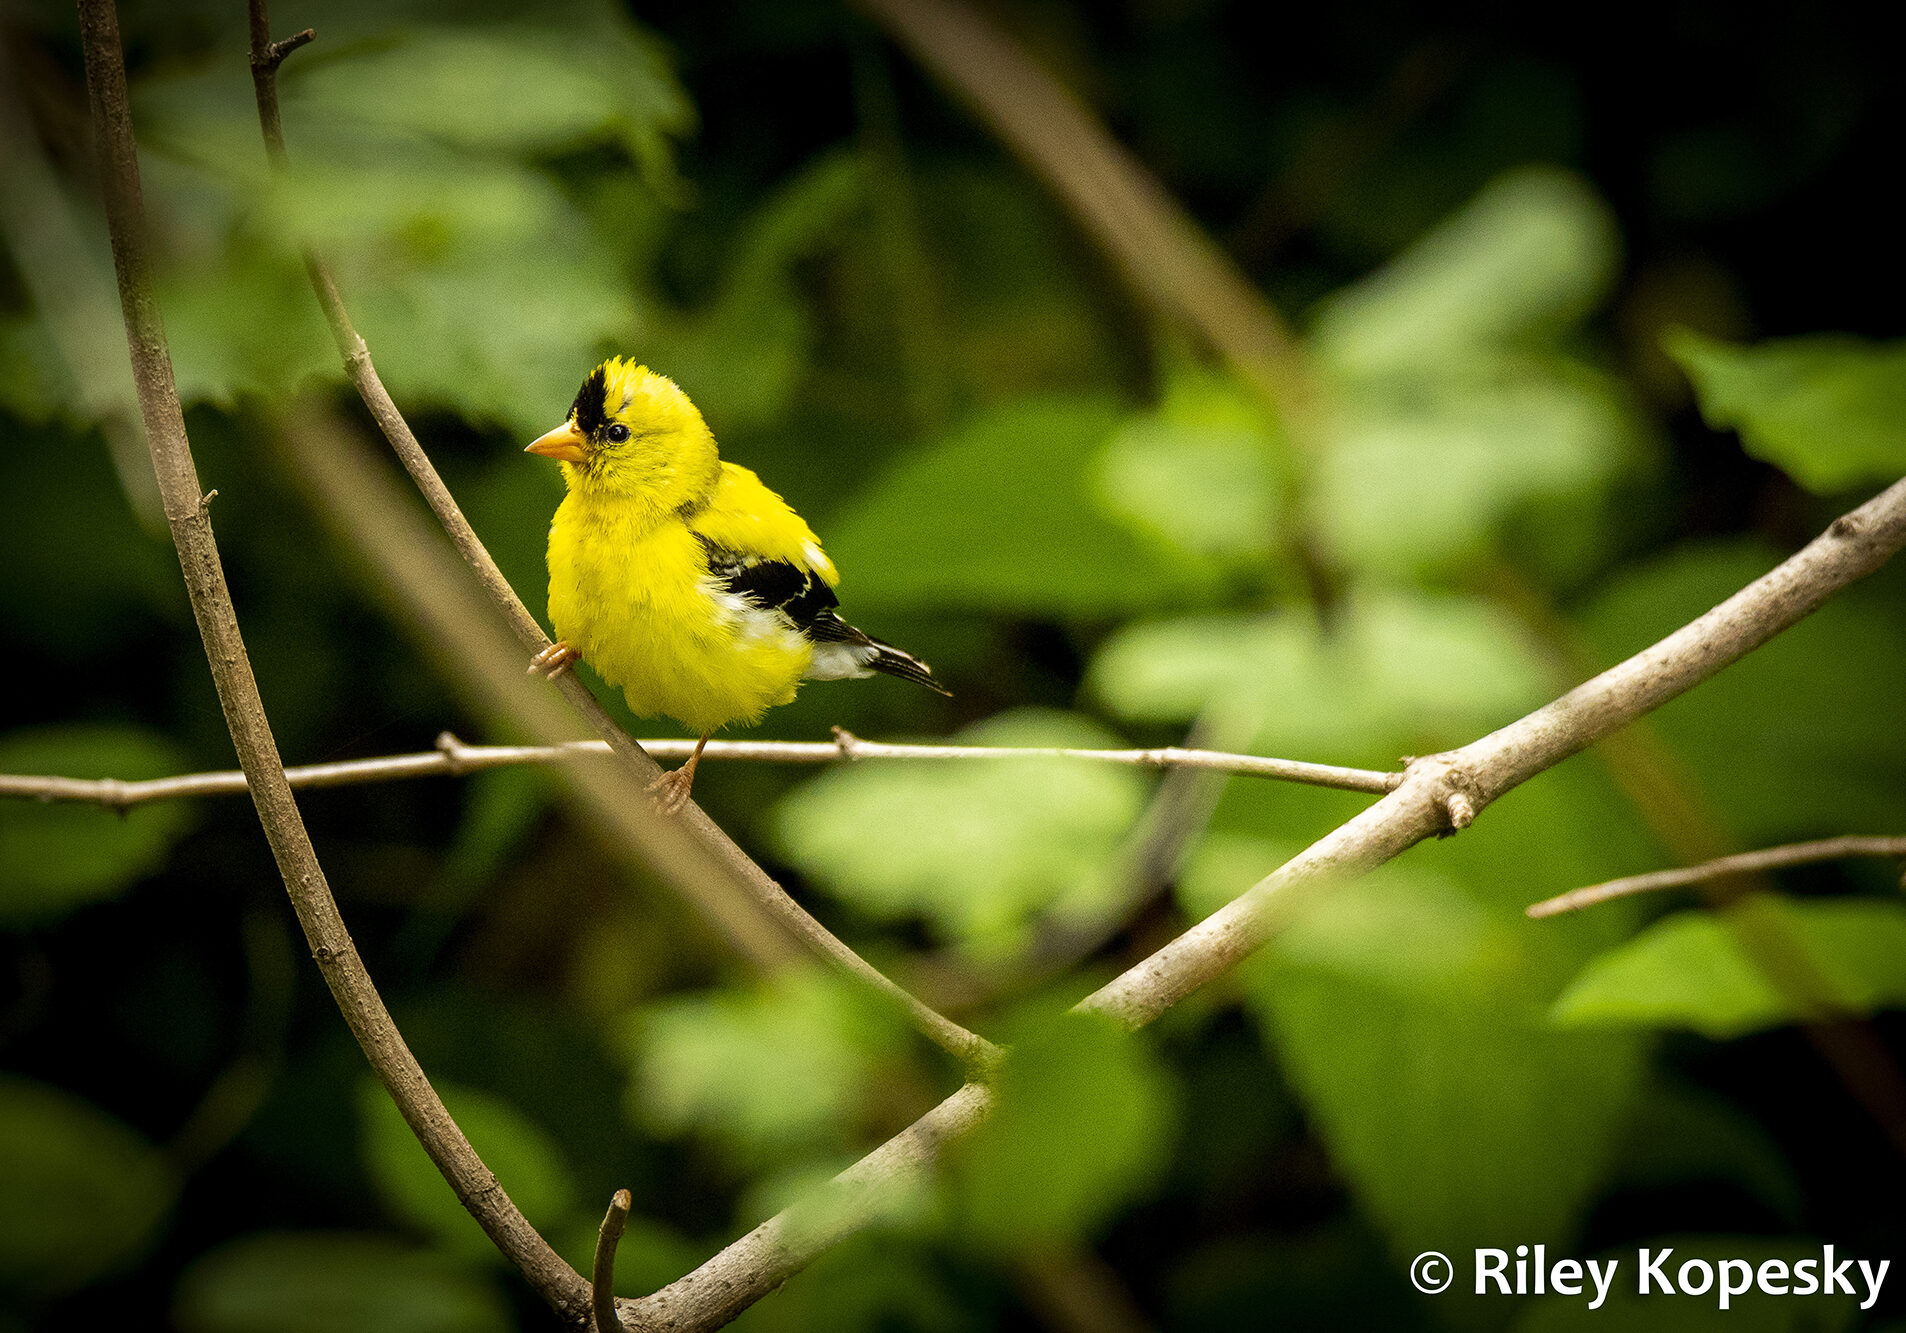 Small yellow bird sits on a twig